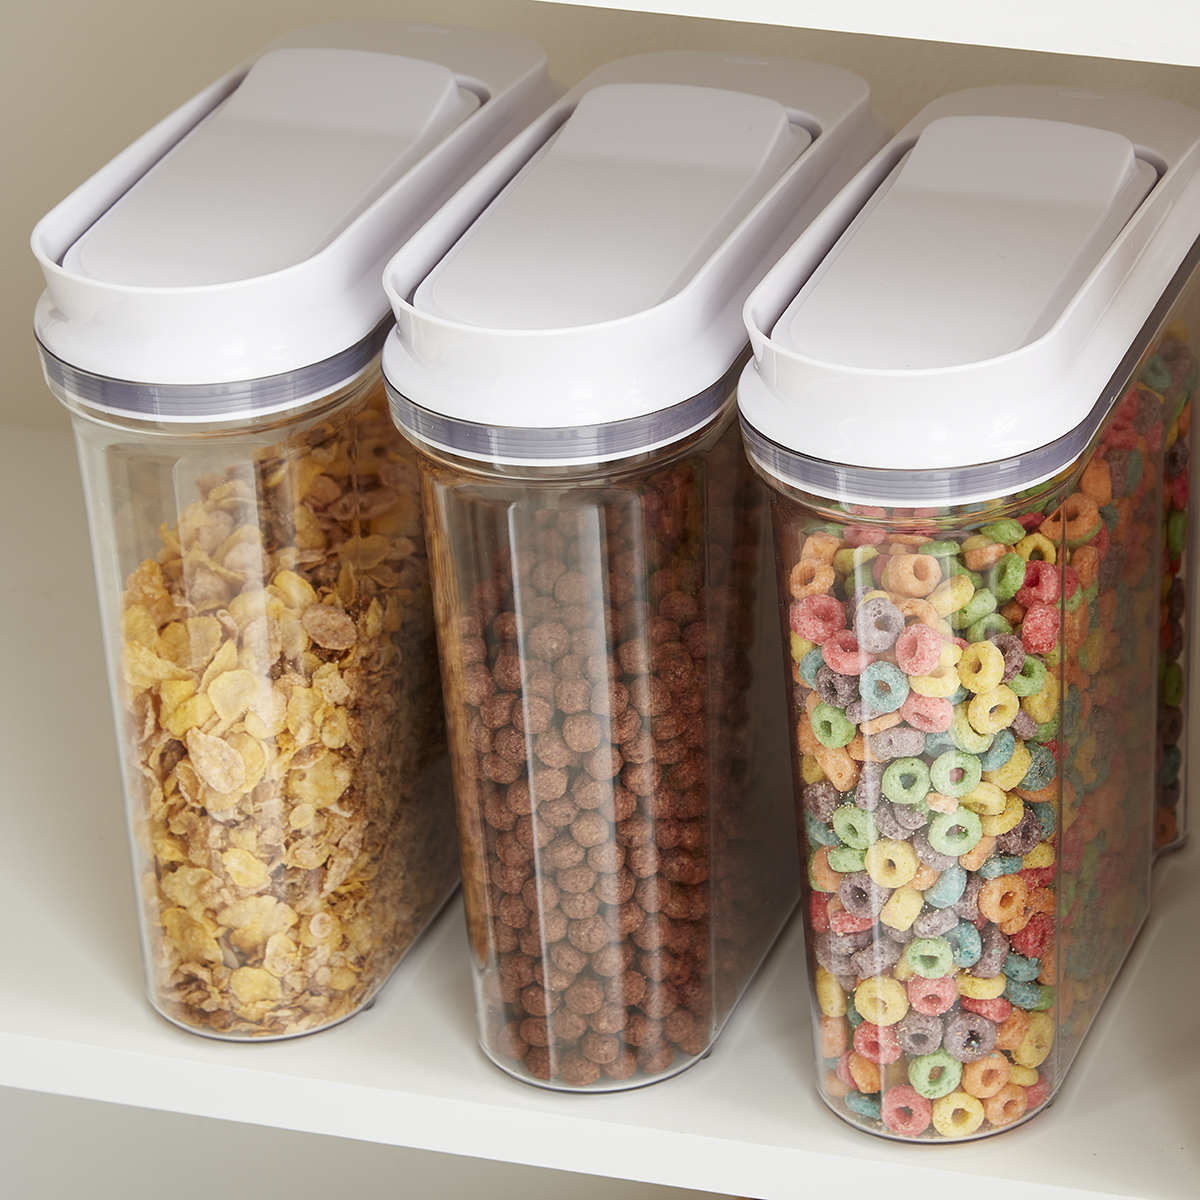 https://www.containerstore.com/catalogimages/357266/GW_18_Pantry-Hyacynth-Bins_Details_R.jpg